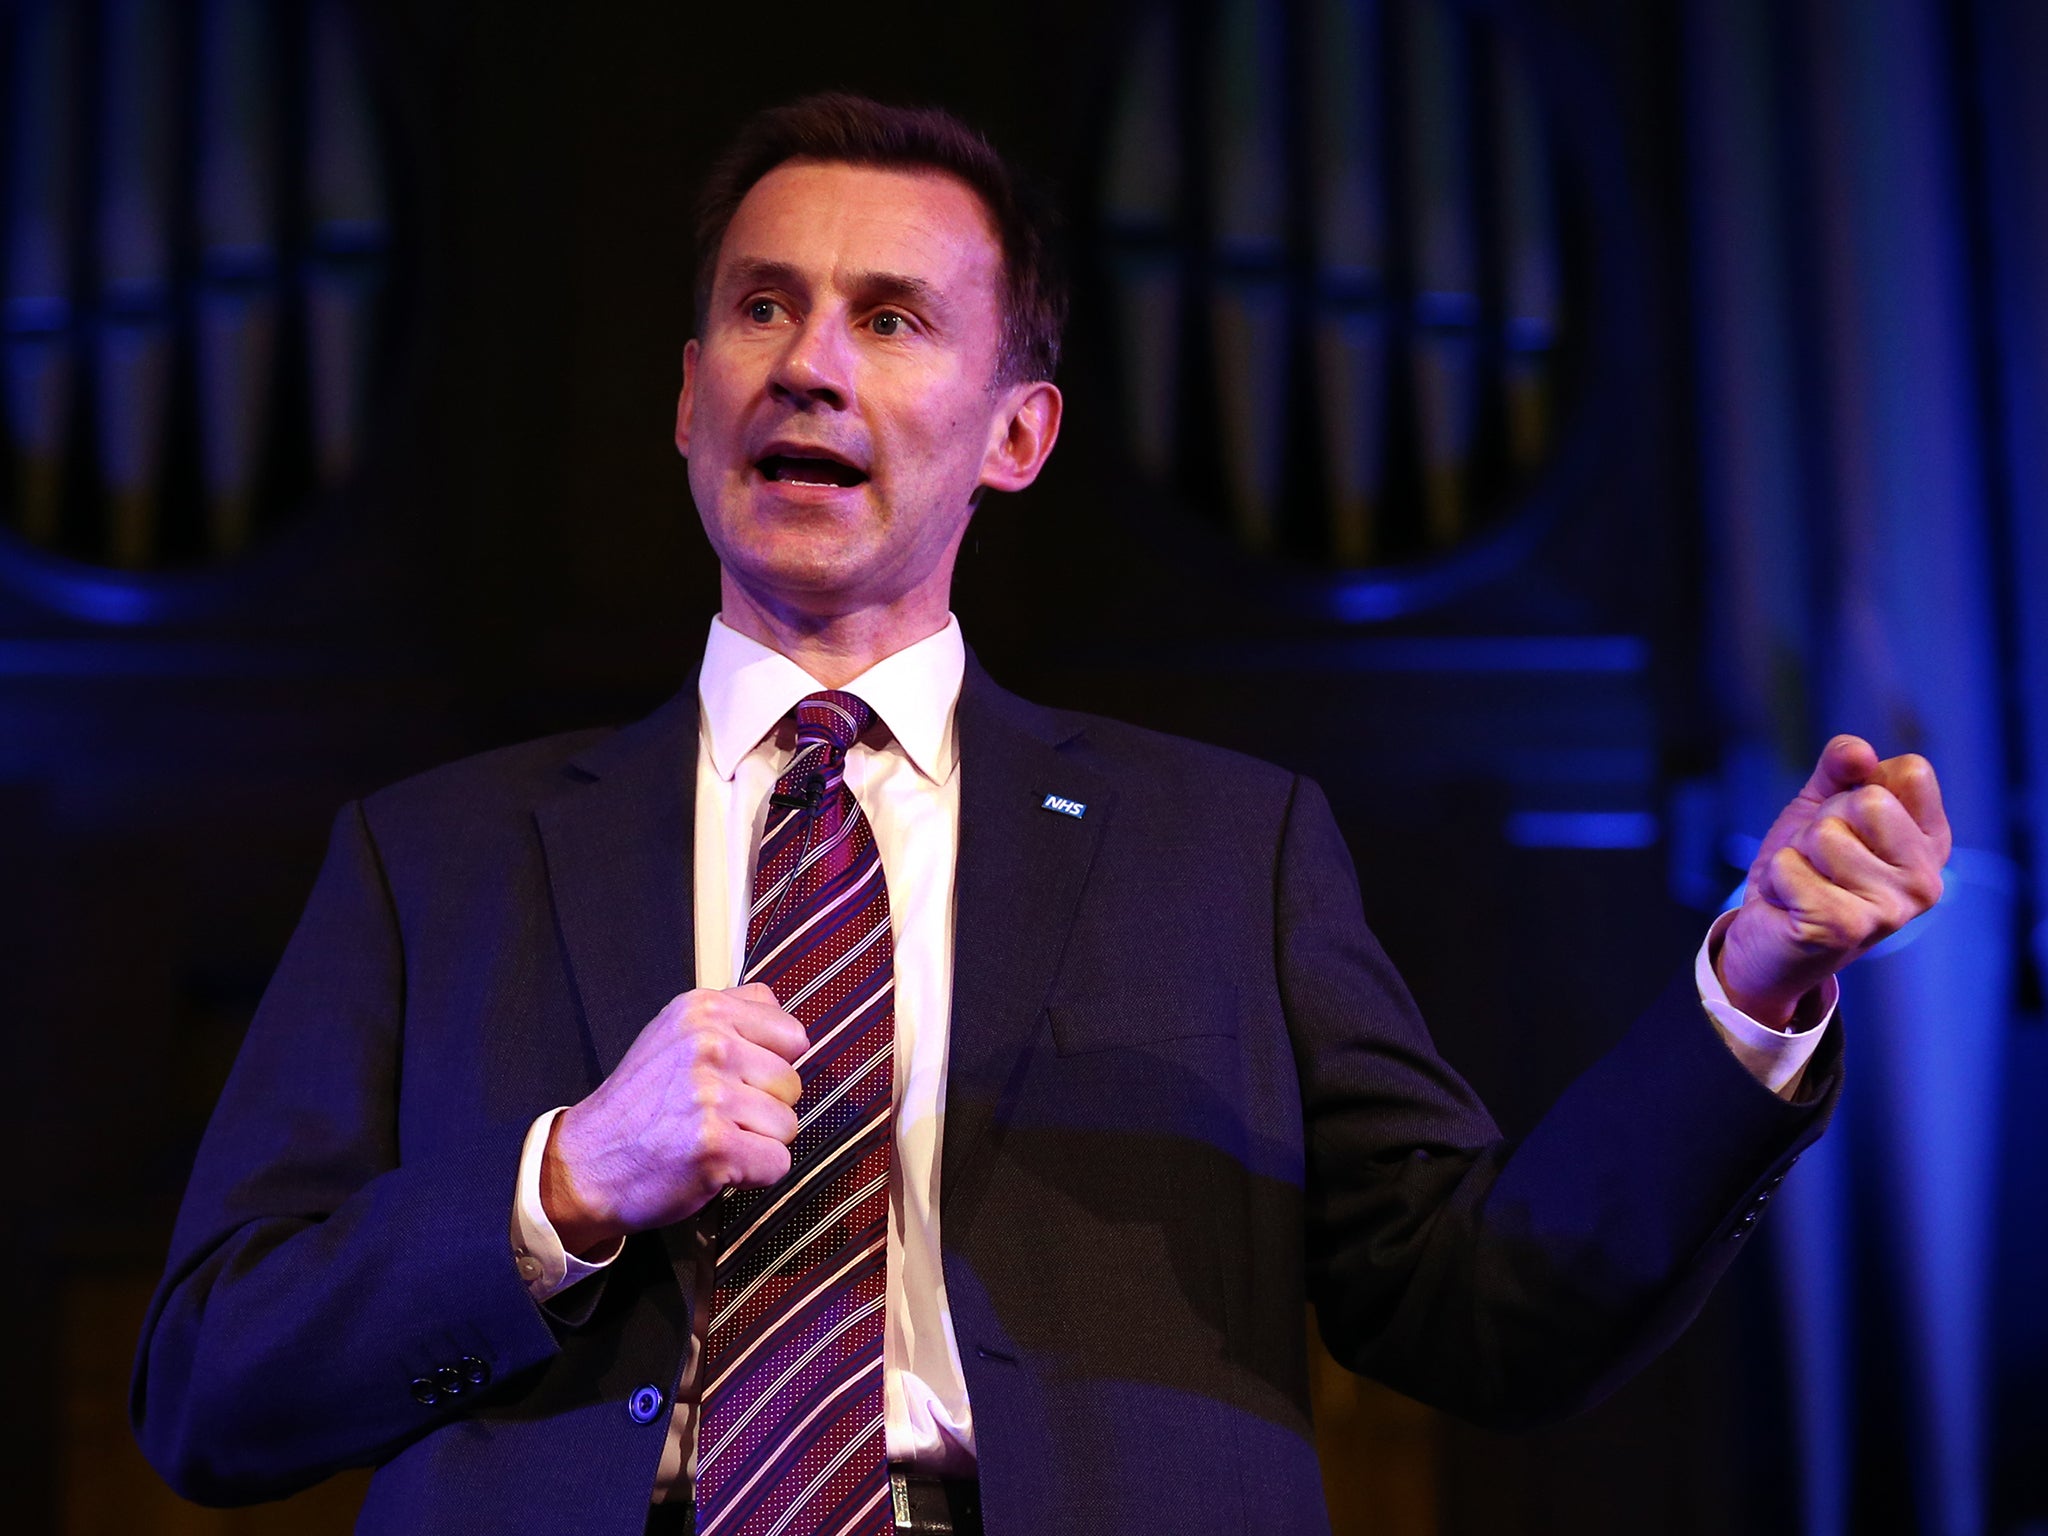 Jeremy Hunt has blamed the British Medical Association for spreading “misinformation” and branded them “irresponsible"